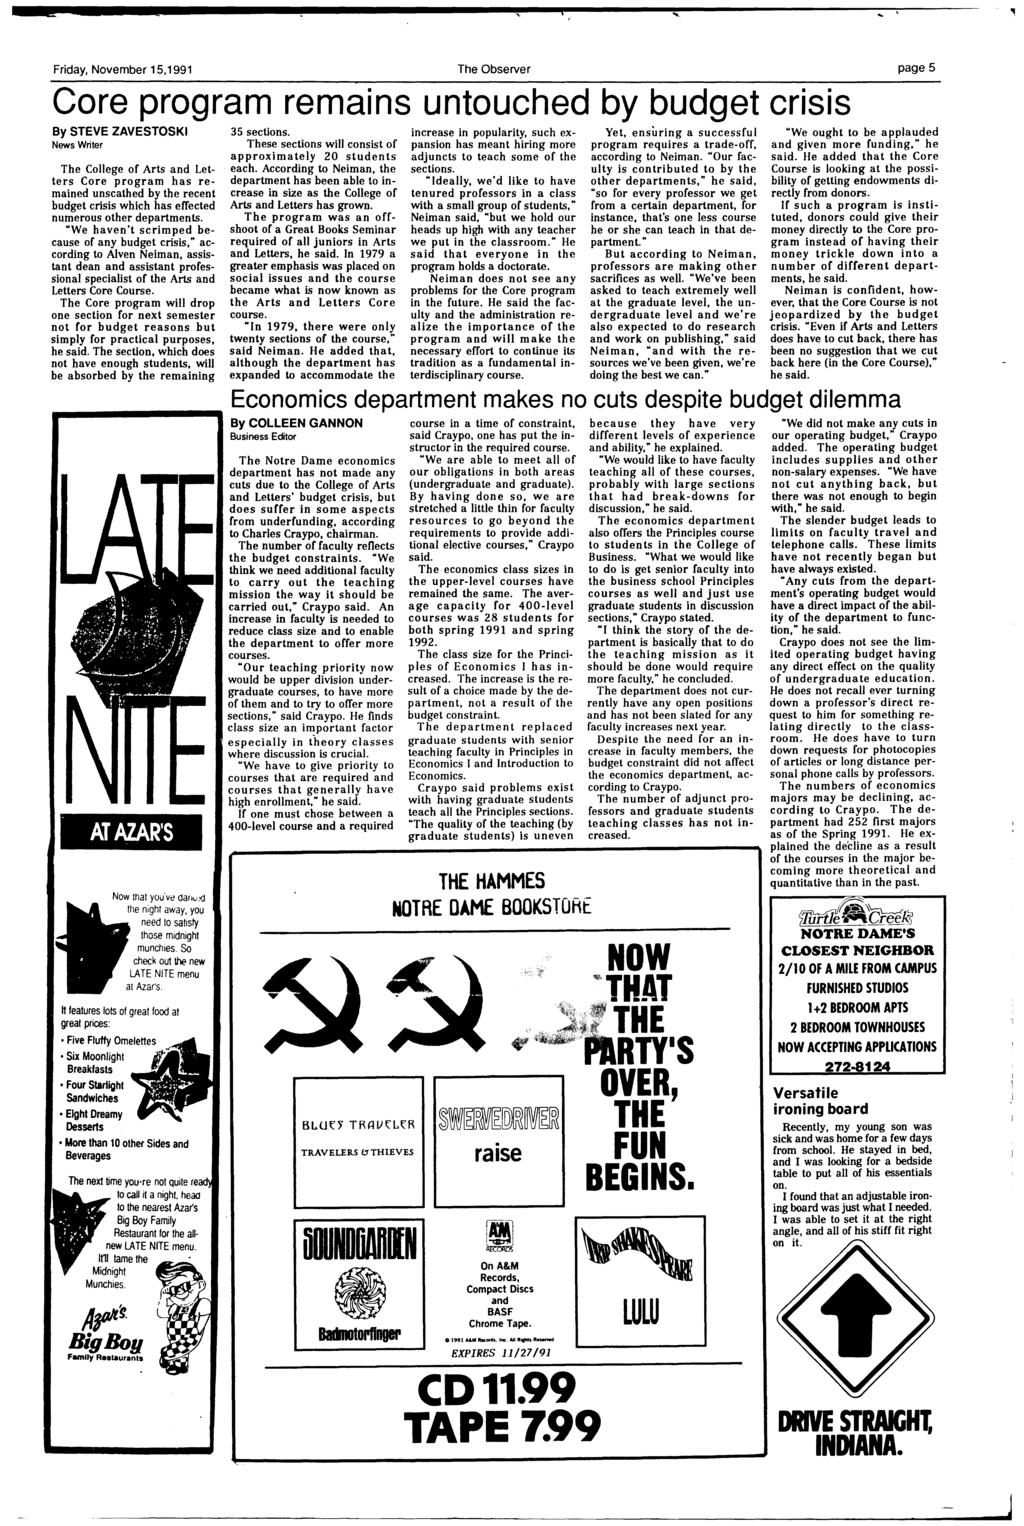 ... ' Friday, November 15,1991 The Observer page 5 Core program remains untouched by budget crisis By STEVE ZAVESTOSK News Writer The College of Arts and Letters Core program has remained unscathed